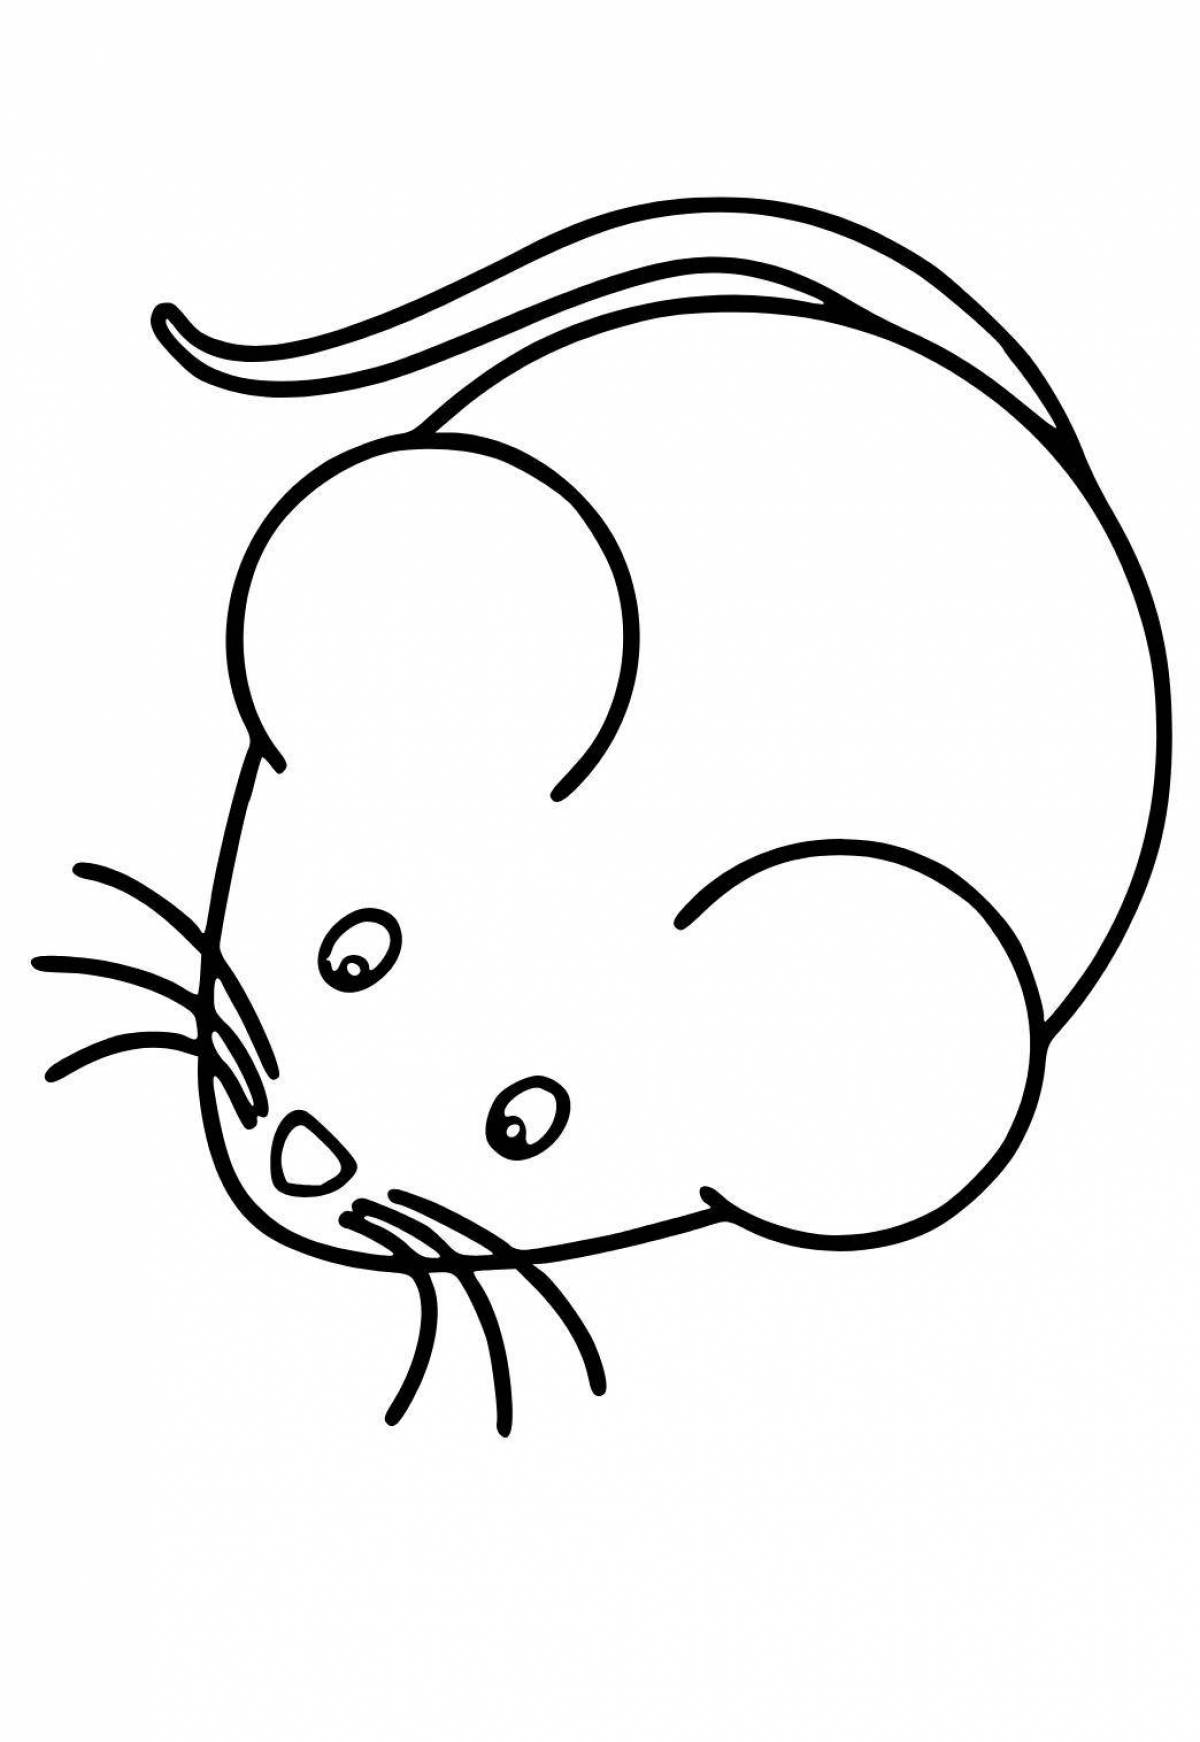 Merry mouse coloring book for kids